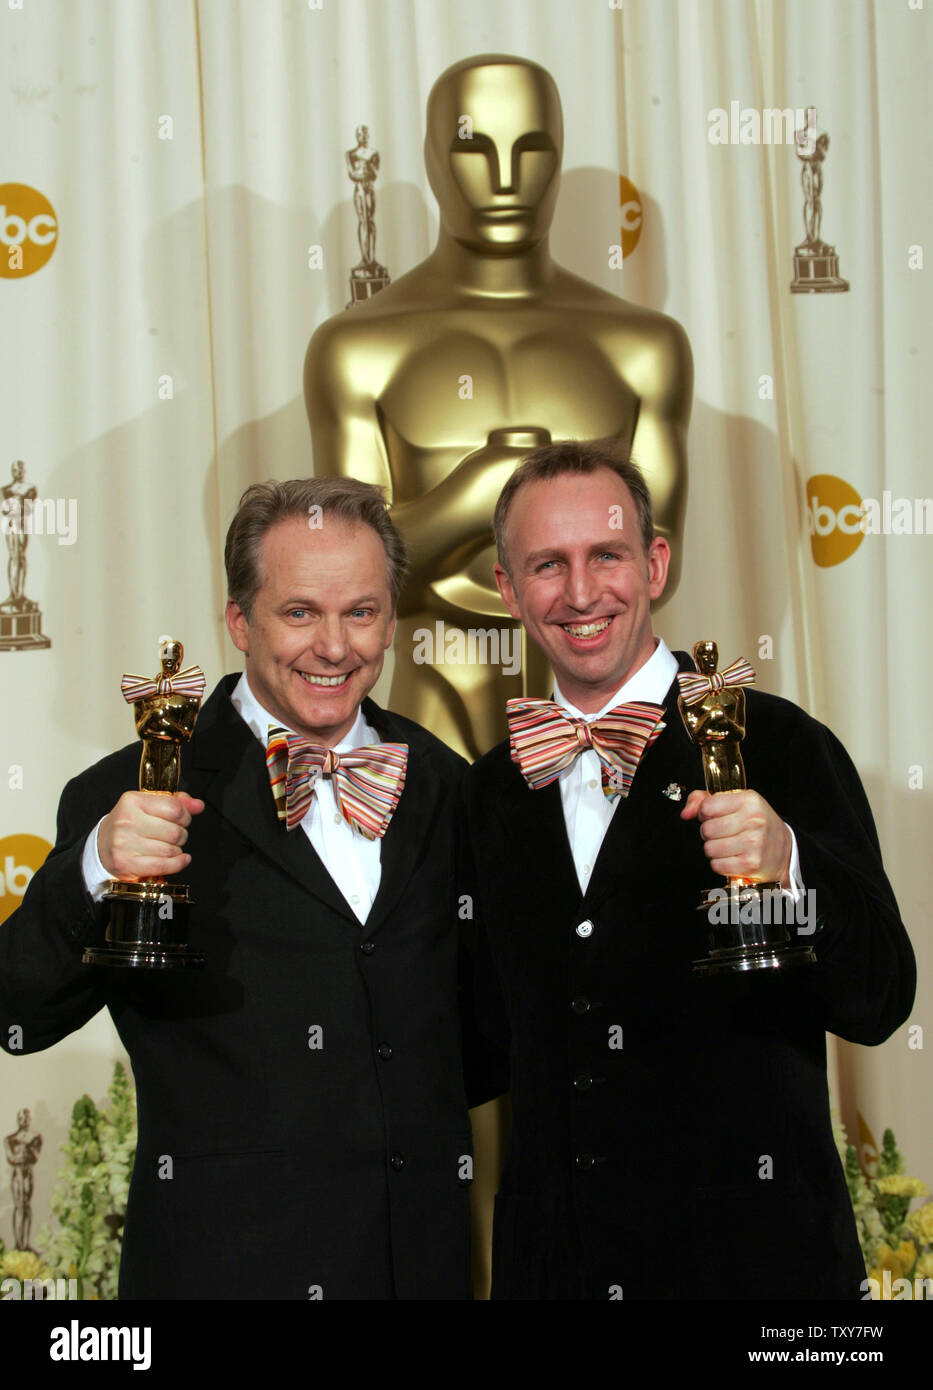 Nick Park and Steve Box show off their Oscars after winning for Best  Animated Feature for "Wallace and Gromit in the Curse of the Were-Rabbit"  at the 78th Annual Academy Awards at